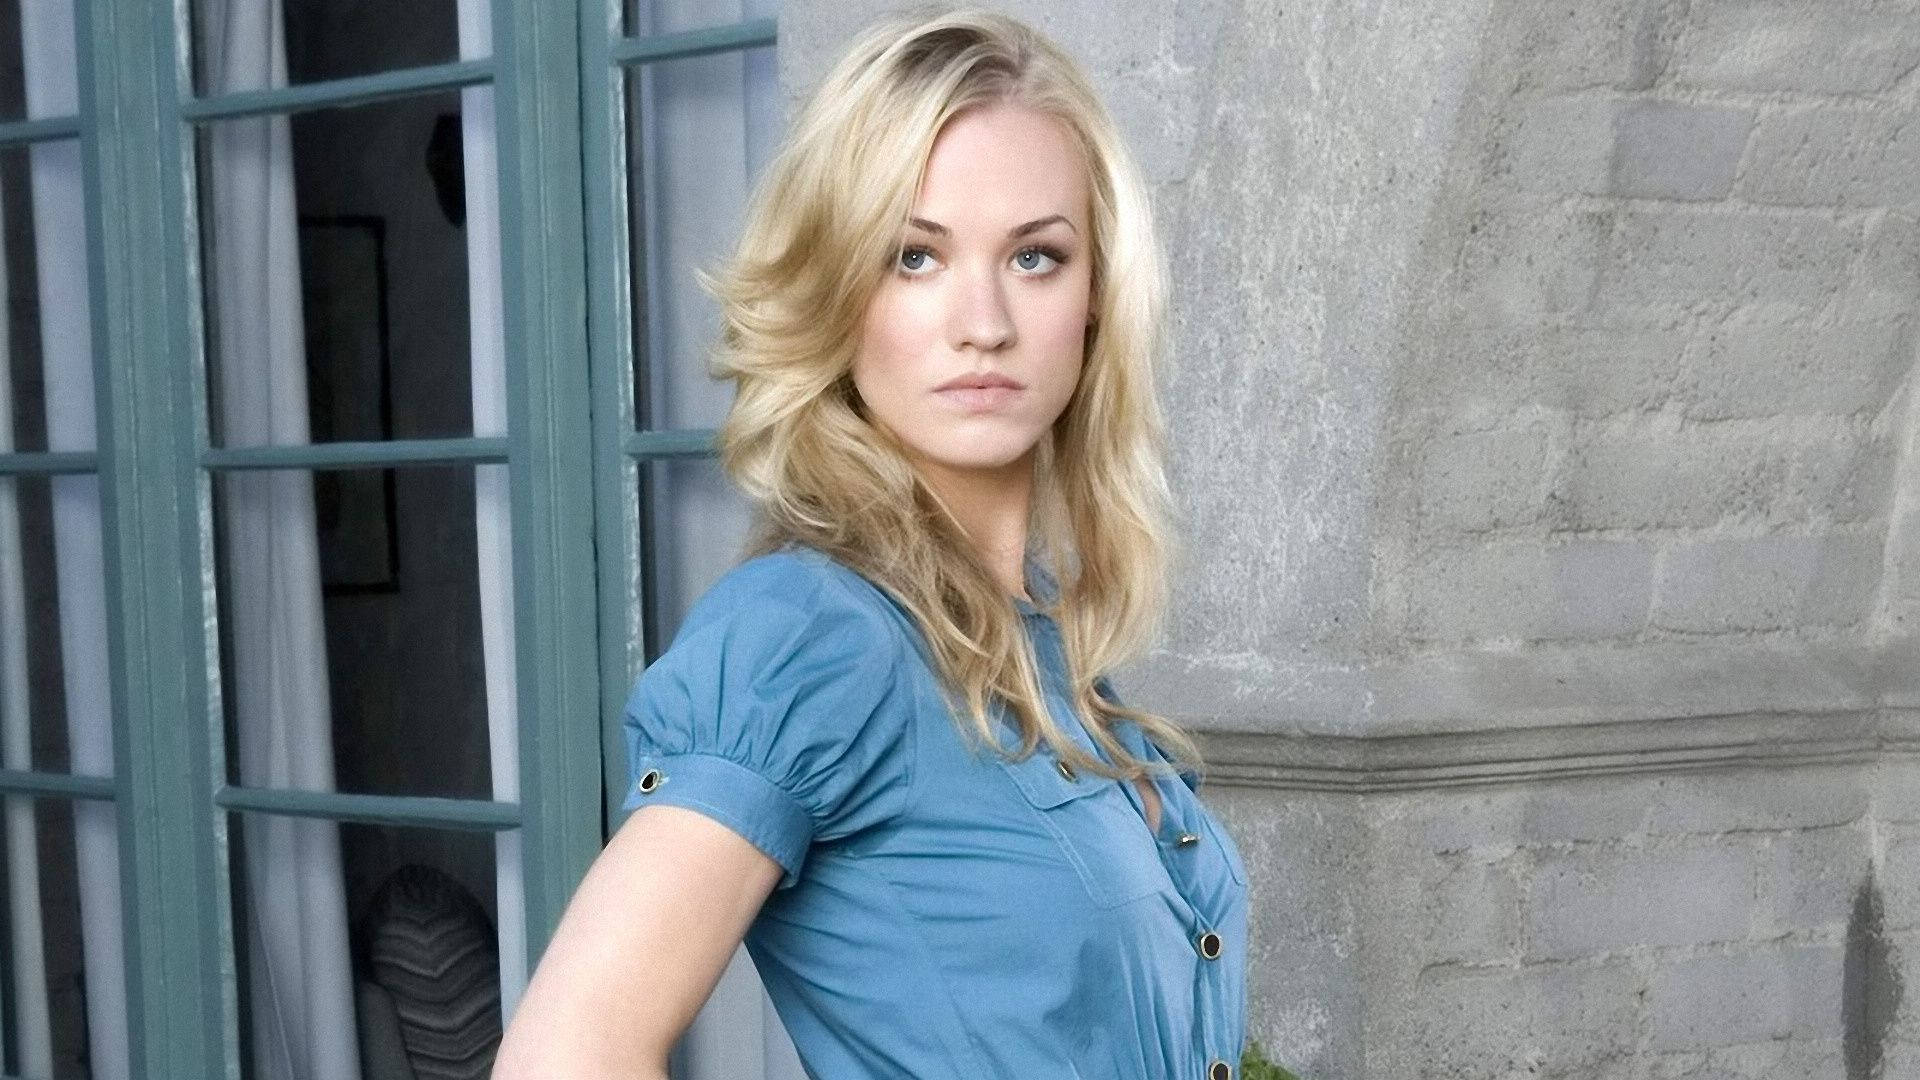 Yvonne Strahovski In Front Of Wall And Door Wallpaper